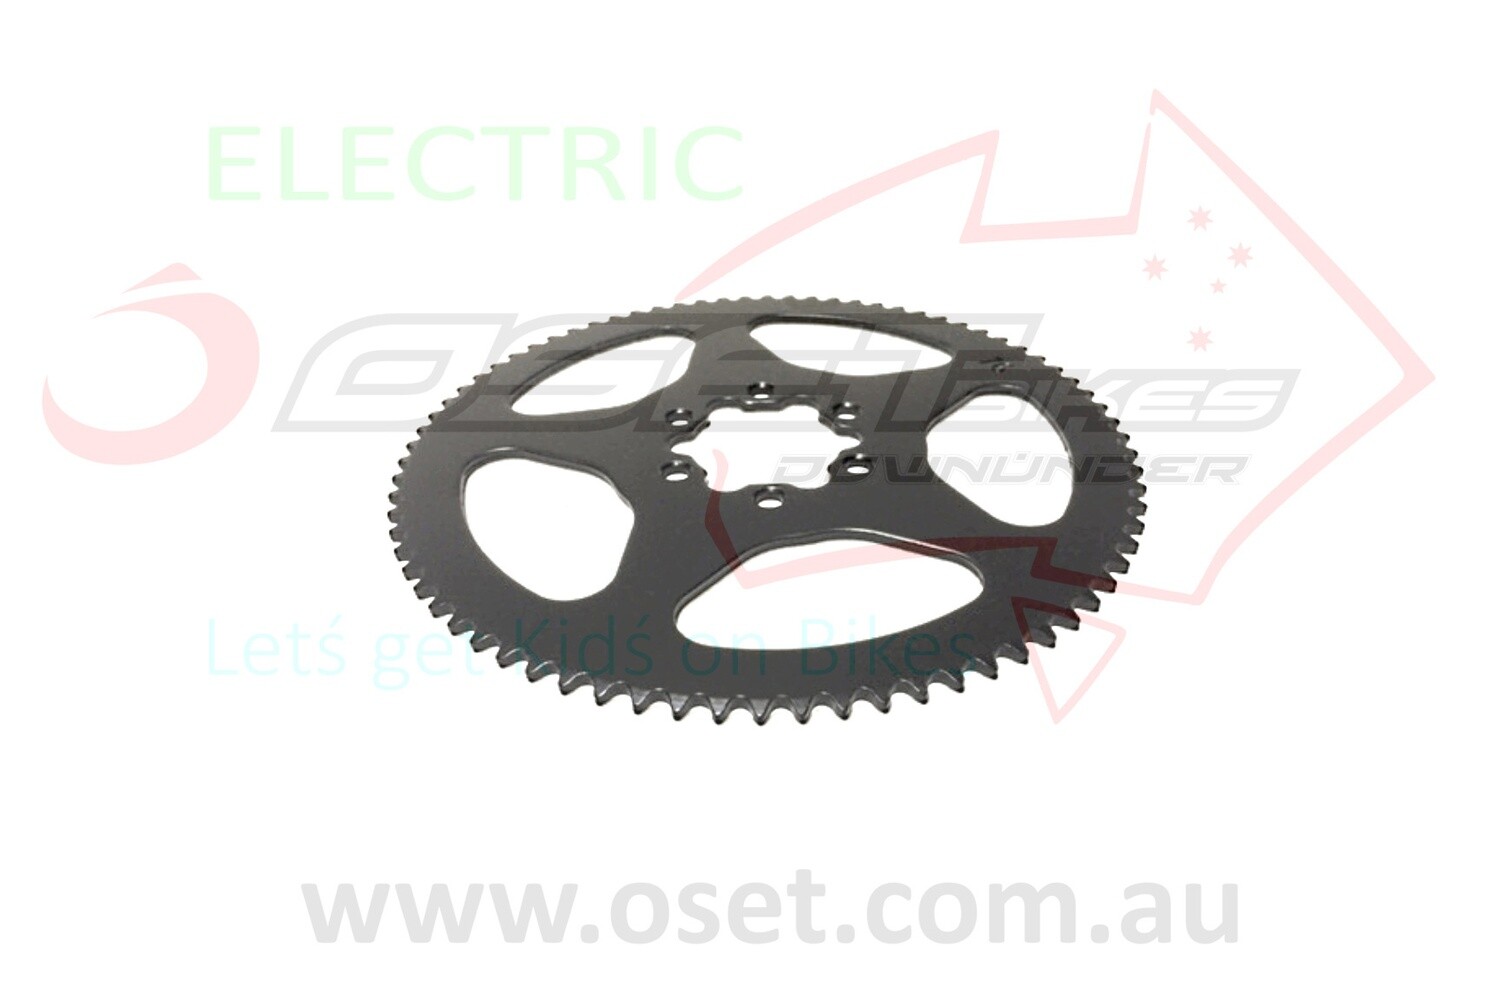 Sprocket Rear, 76T, #25 Chain for OSET12Eco